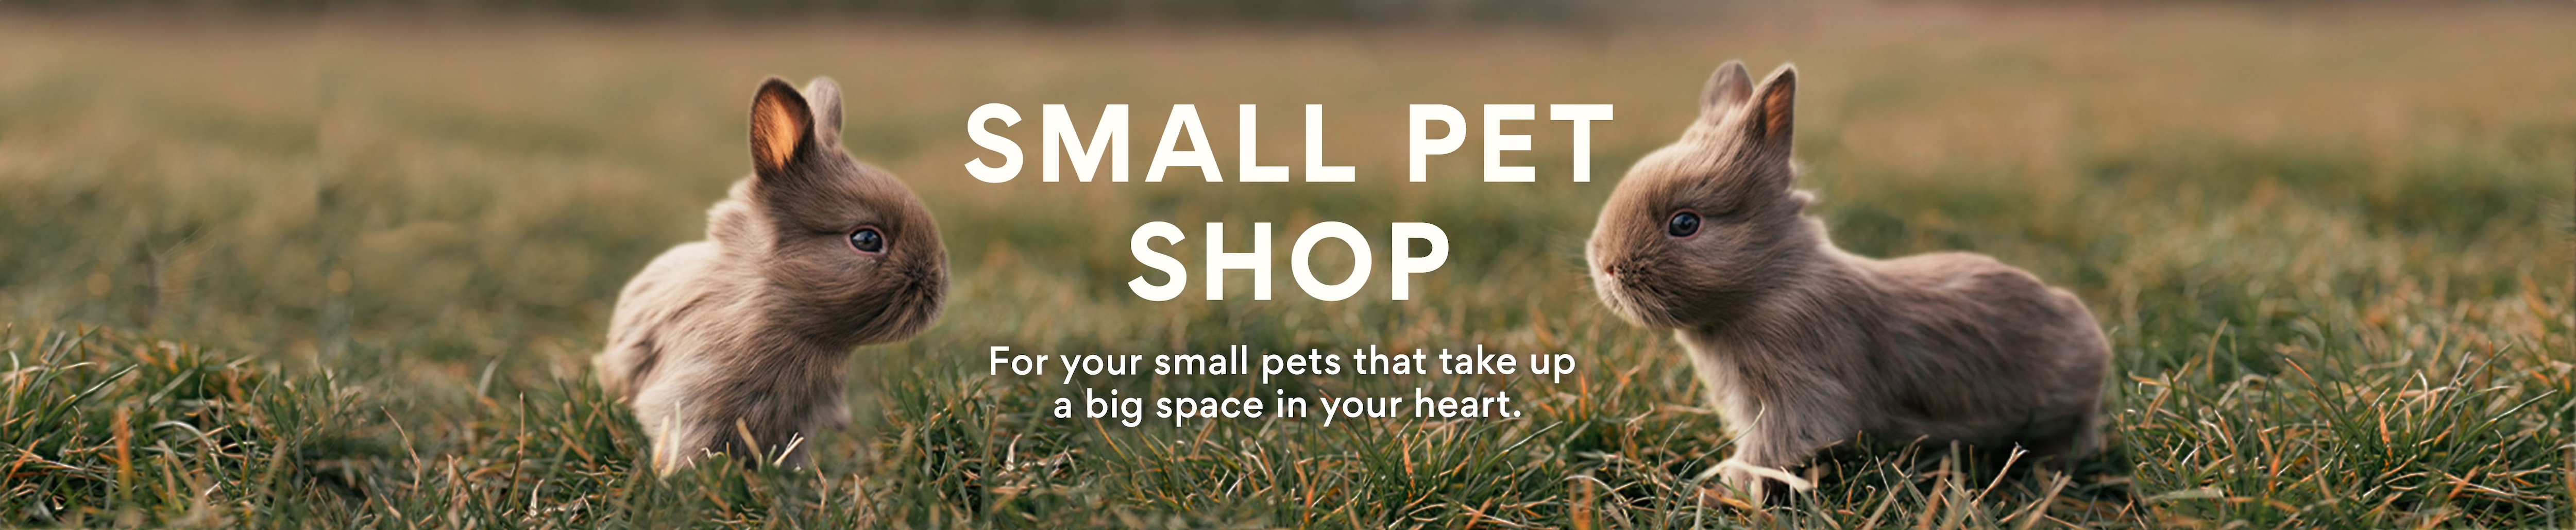 Small Pet Shop. For your small pets that take up a big space in your heart.